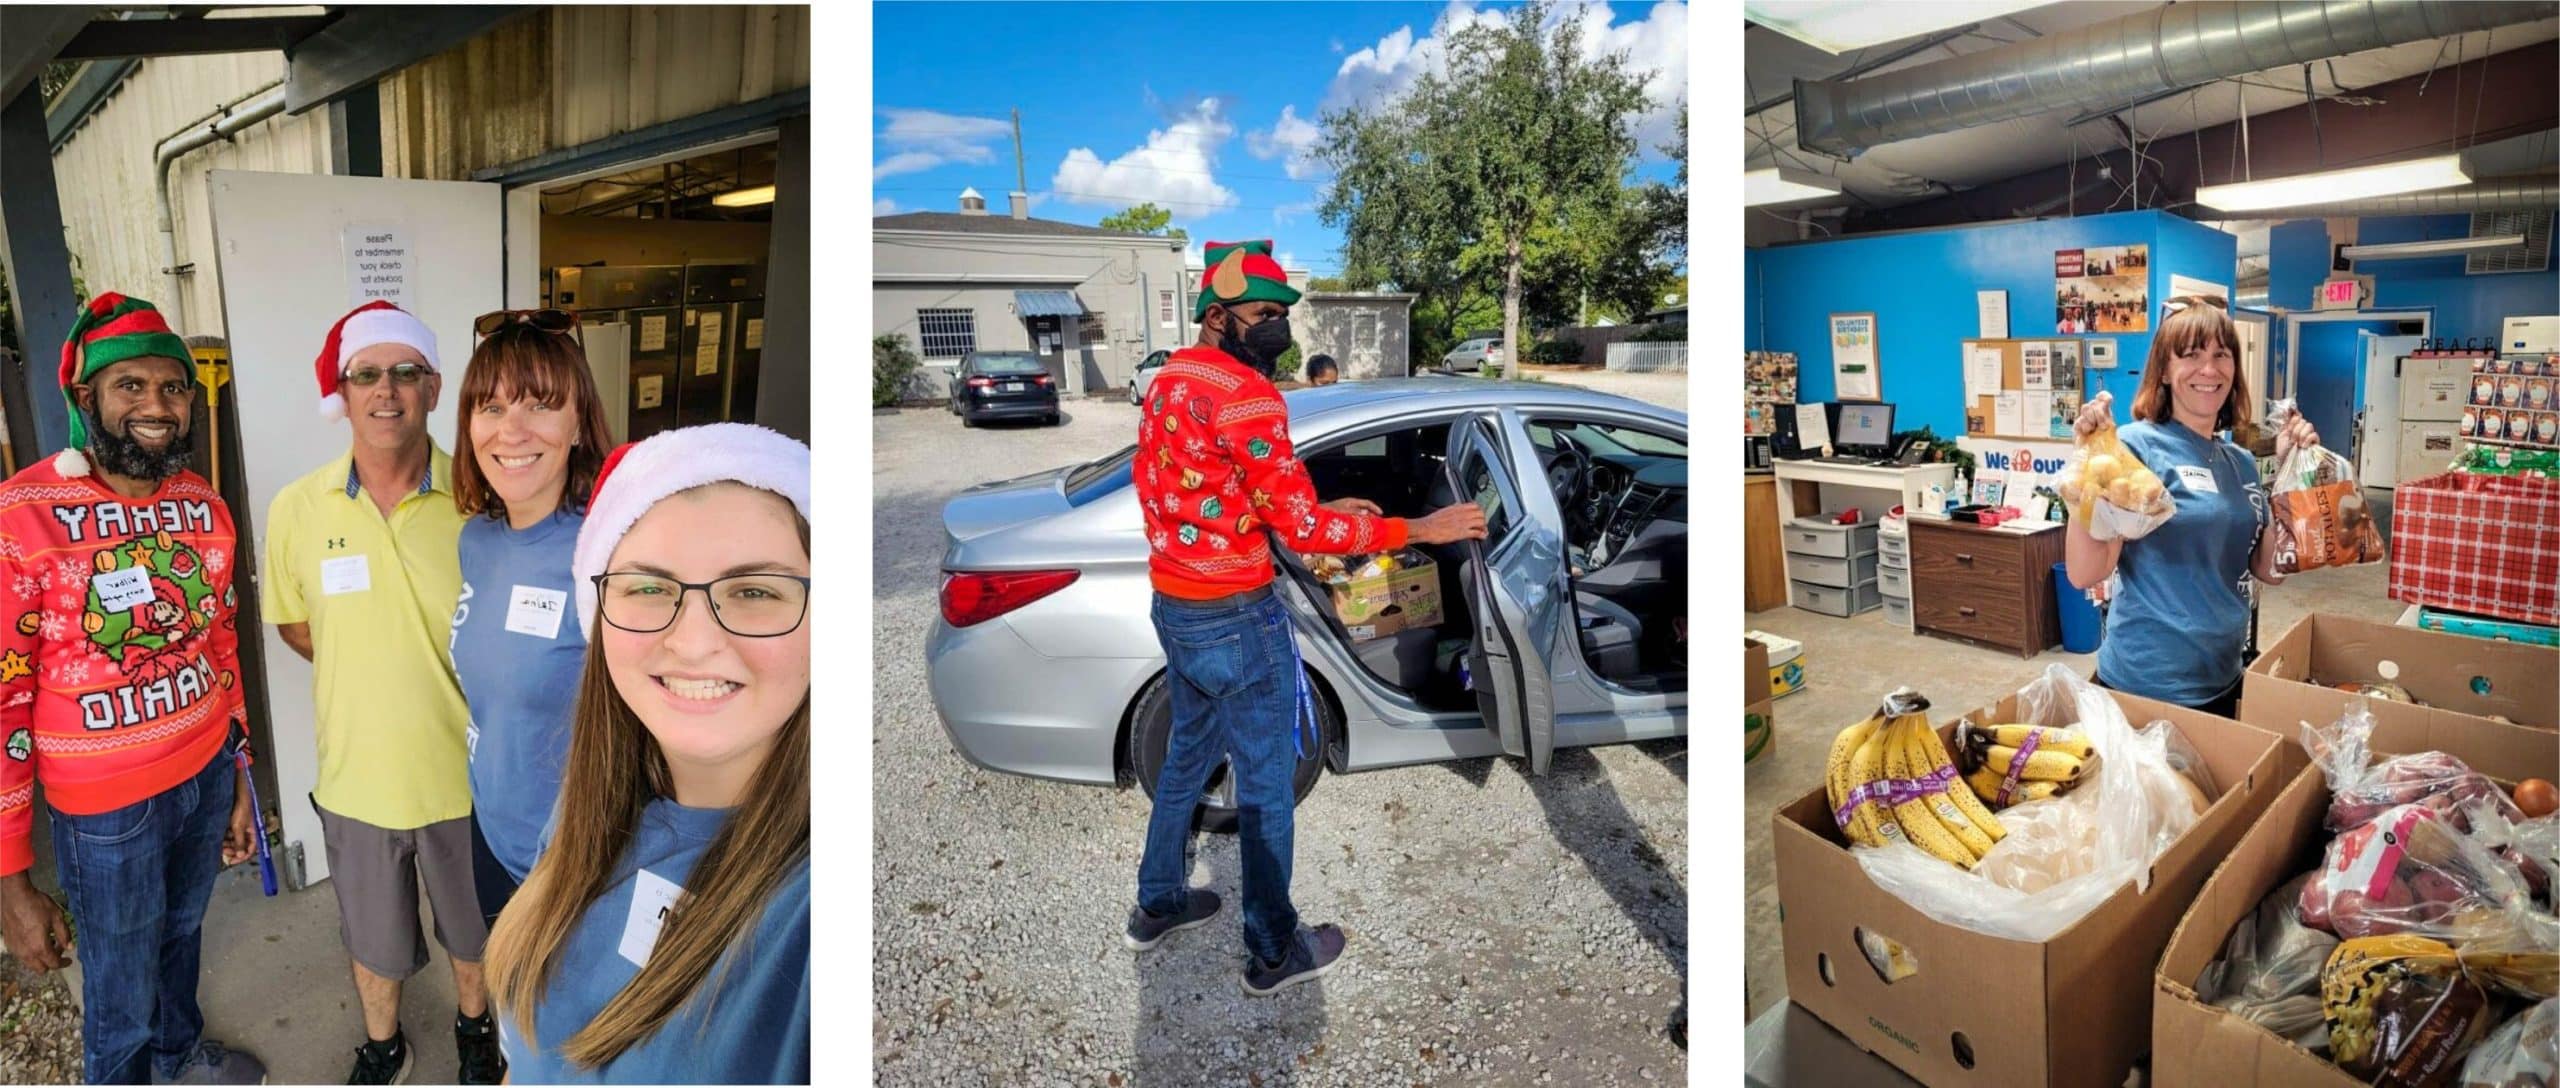 Our professionals in Florida volunteering their time at Christian HELP